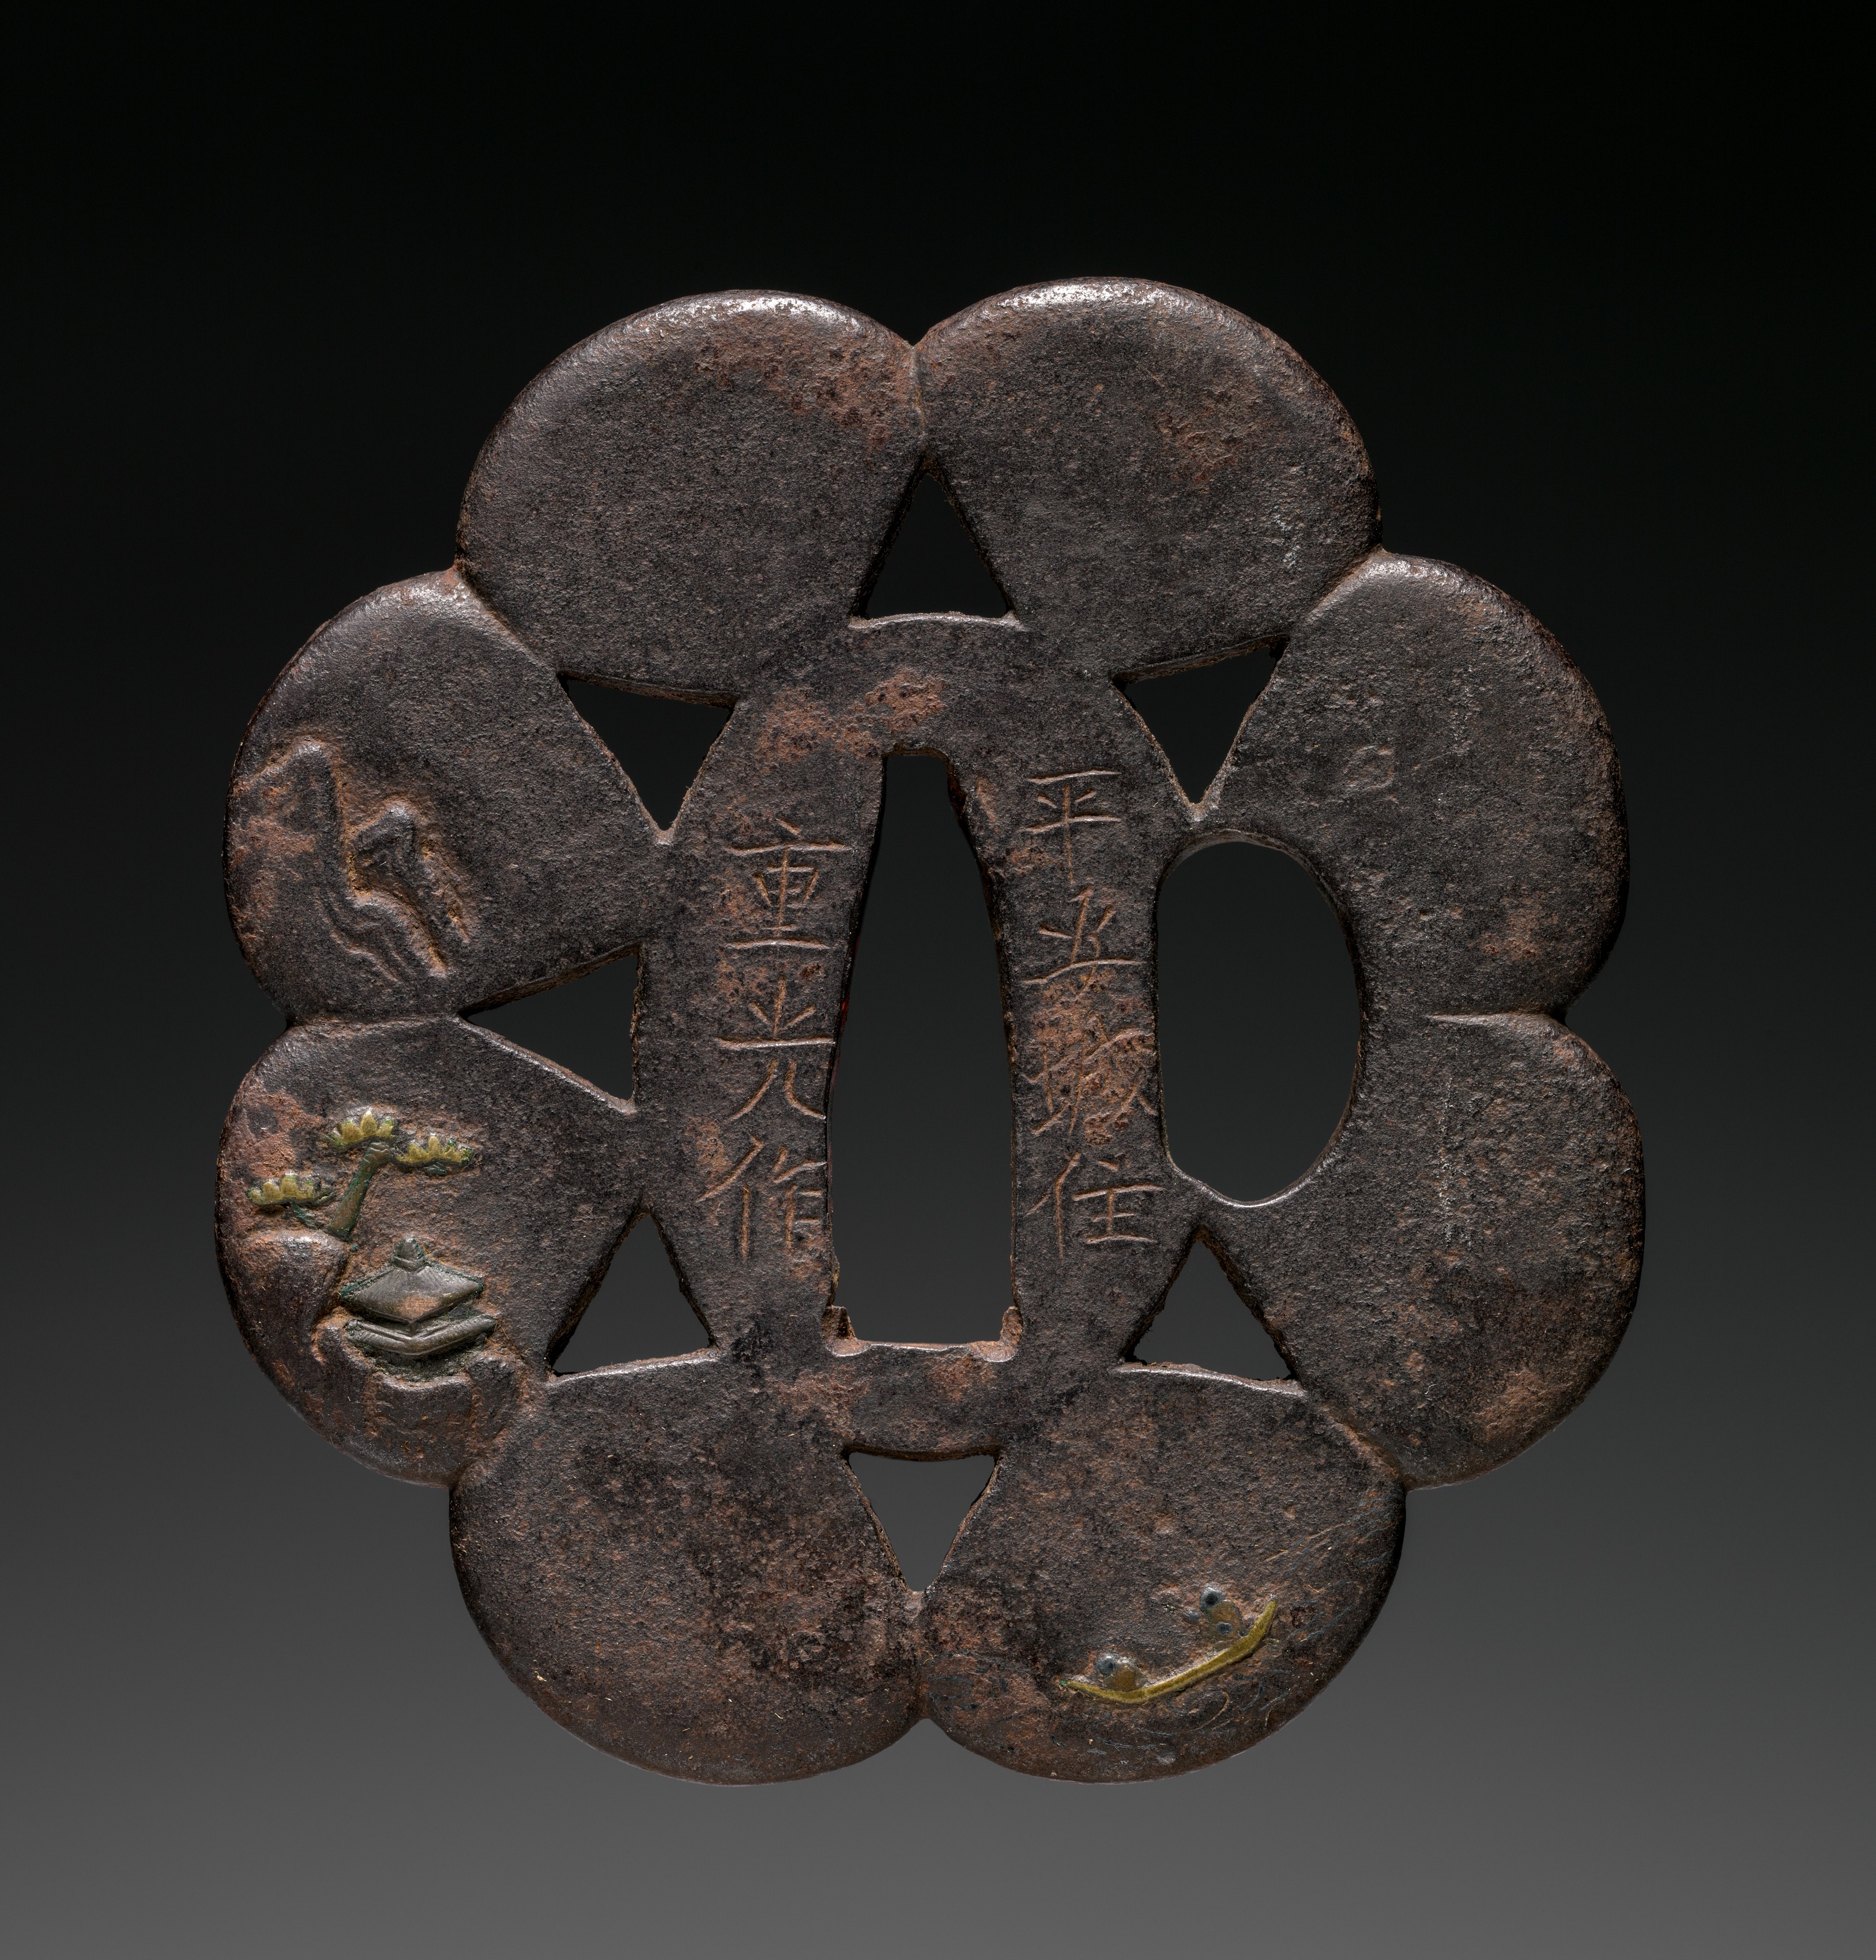 Sword Guard (Tsuba) with Chinese Landscape in Flower